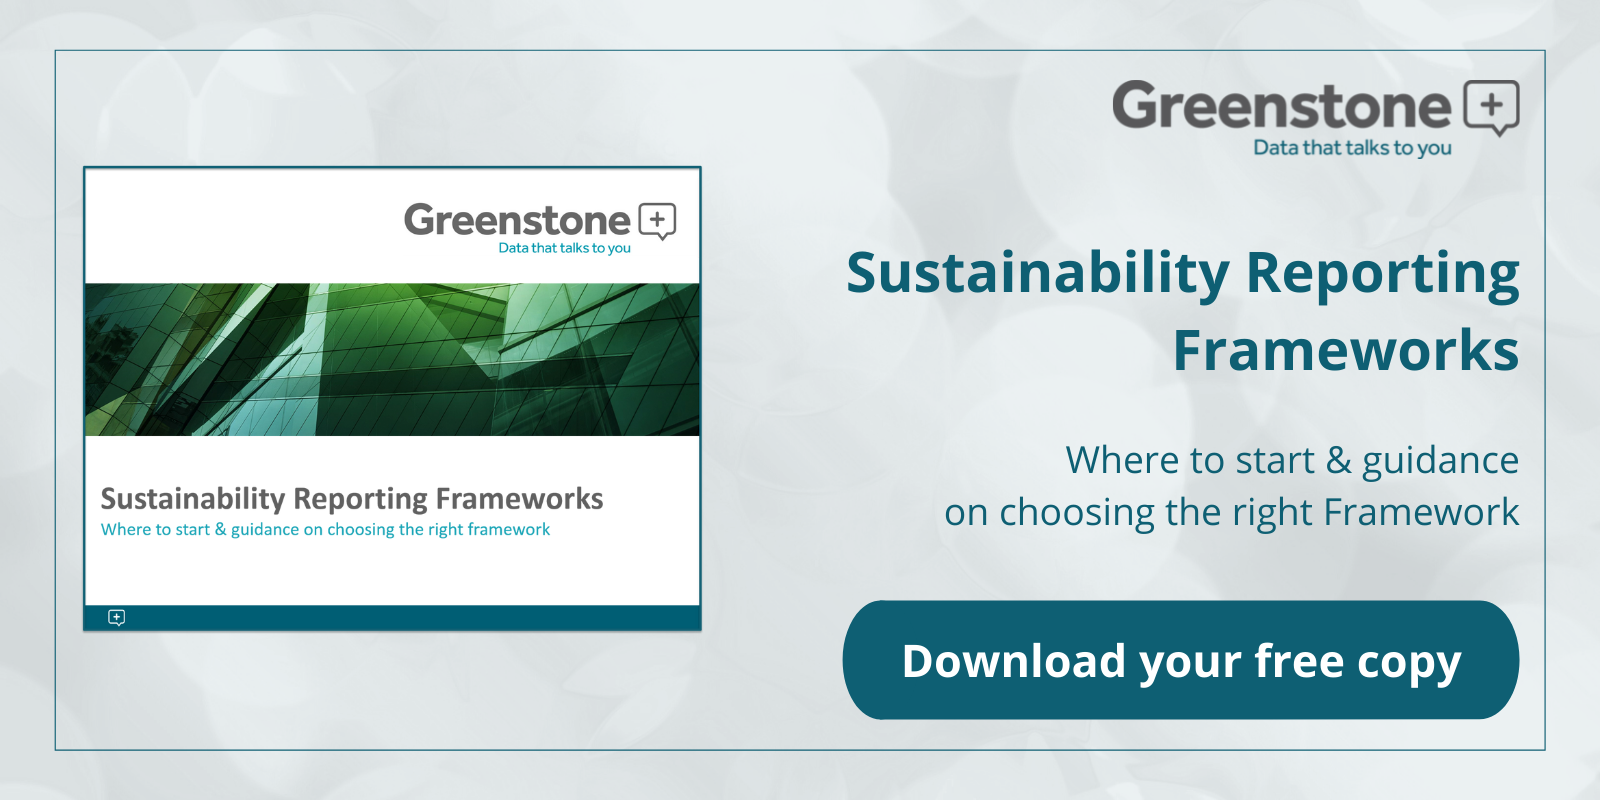 Global sustainability reporting frameworks guide